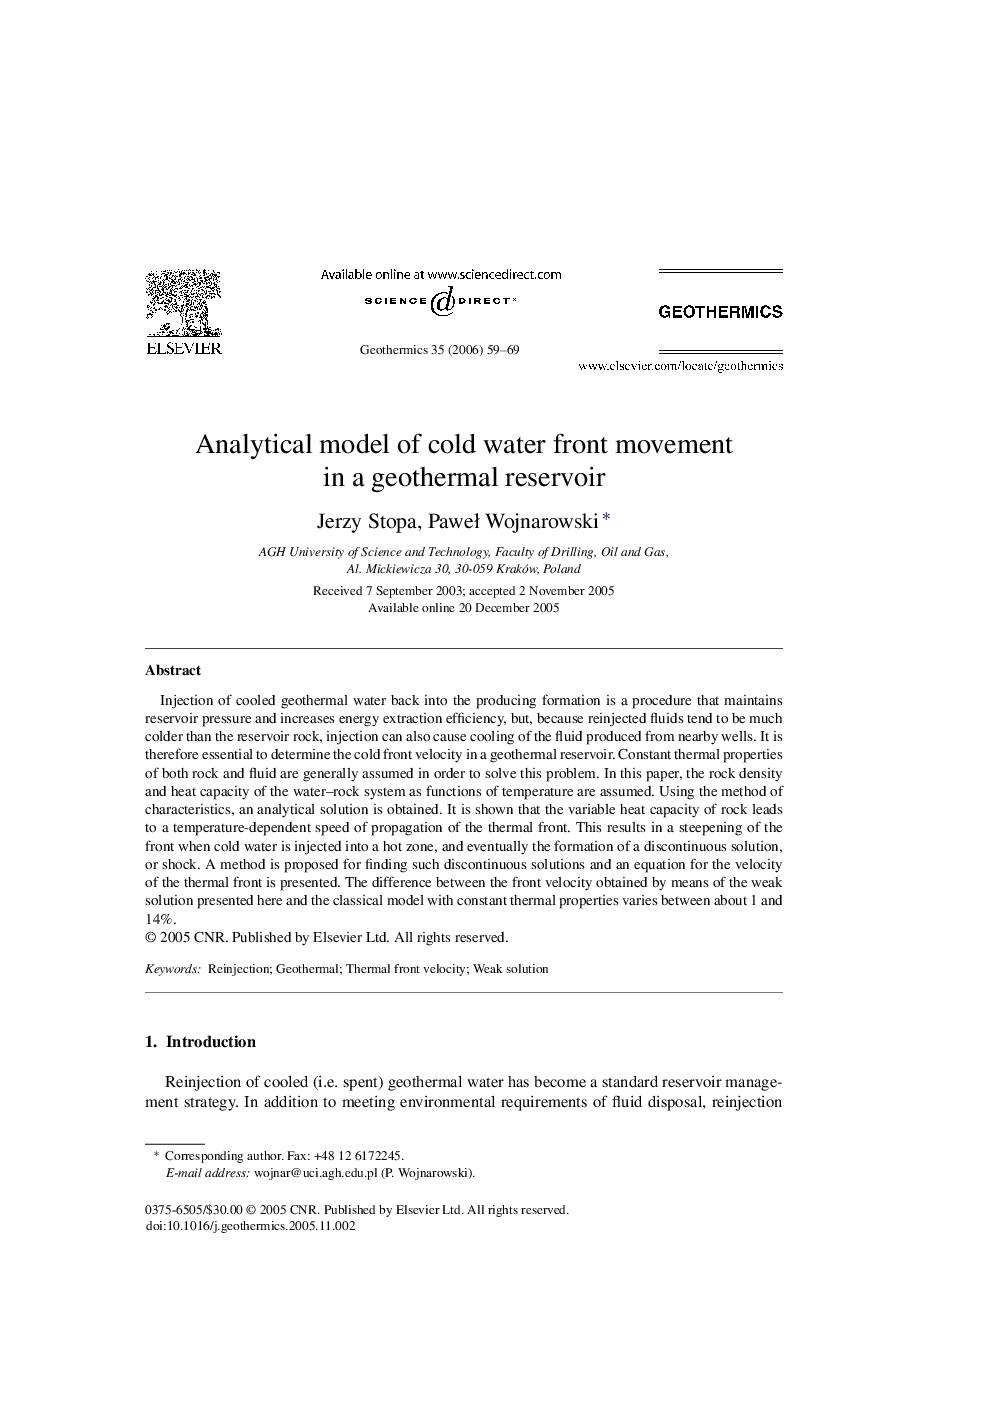 Analytical model of cold water front movement in a geothermal reservoir